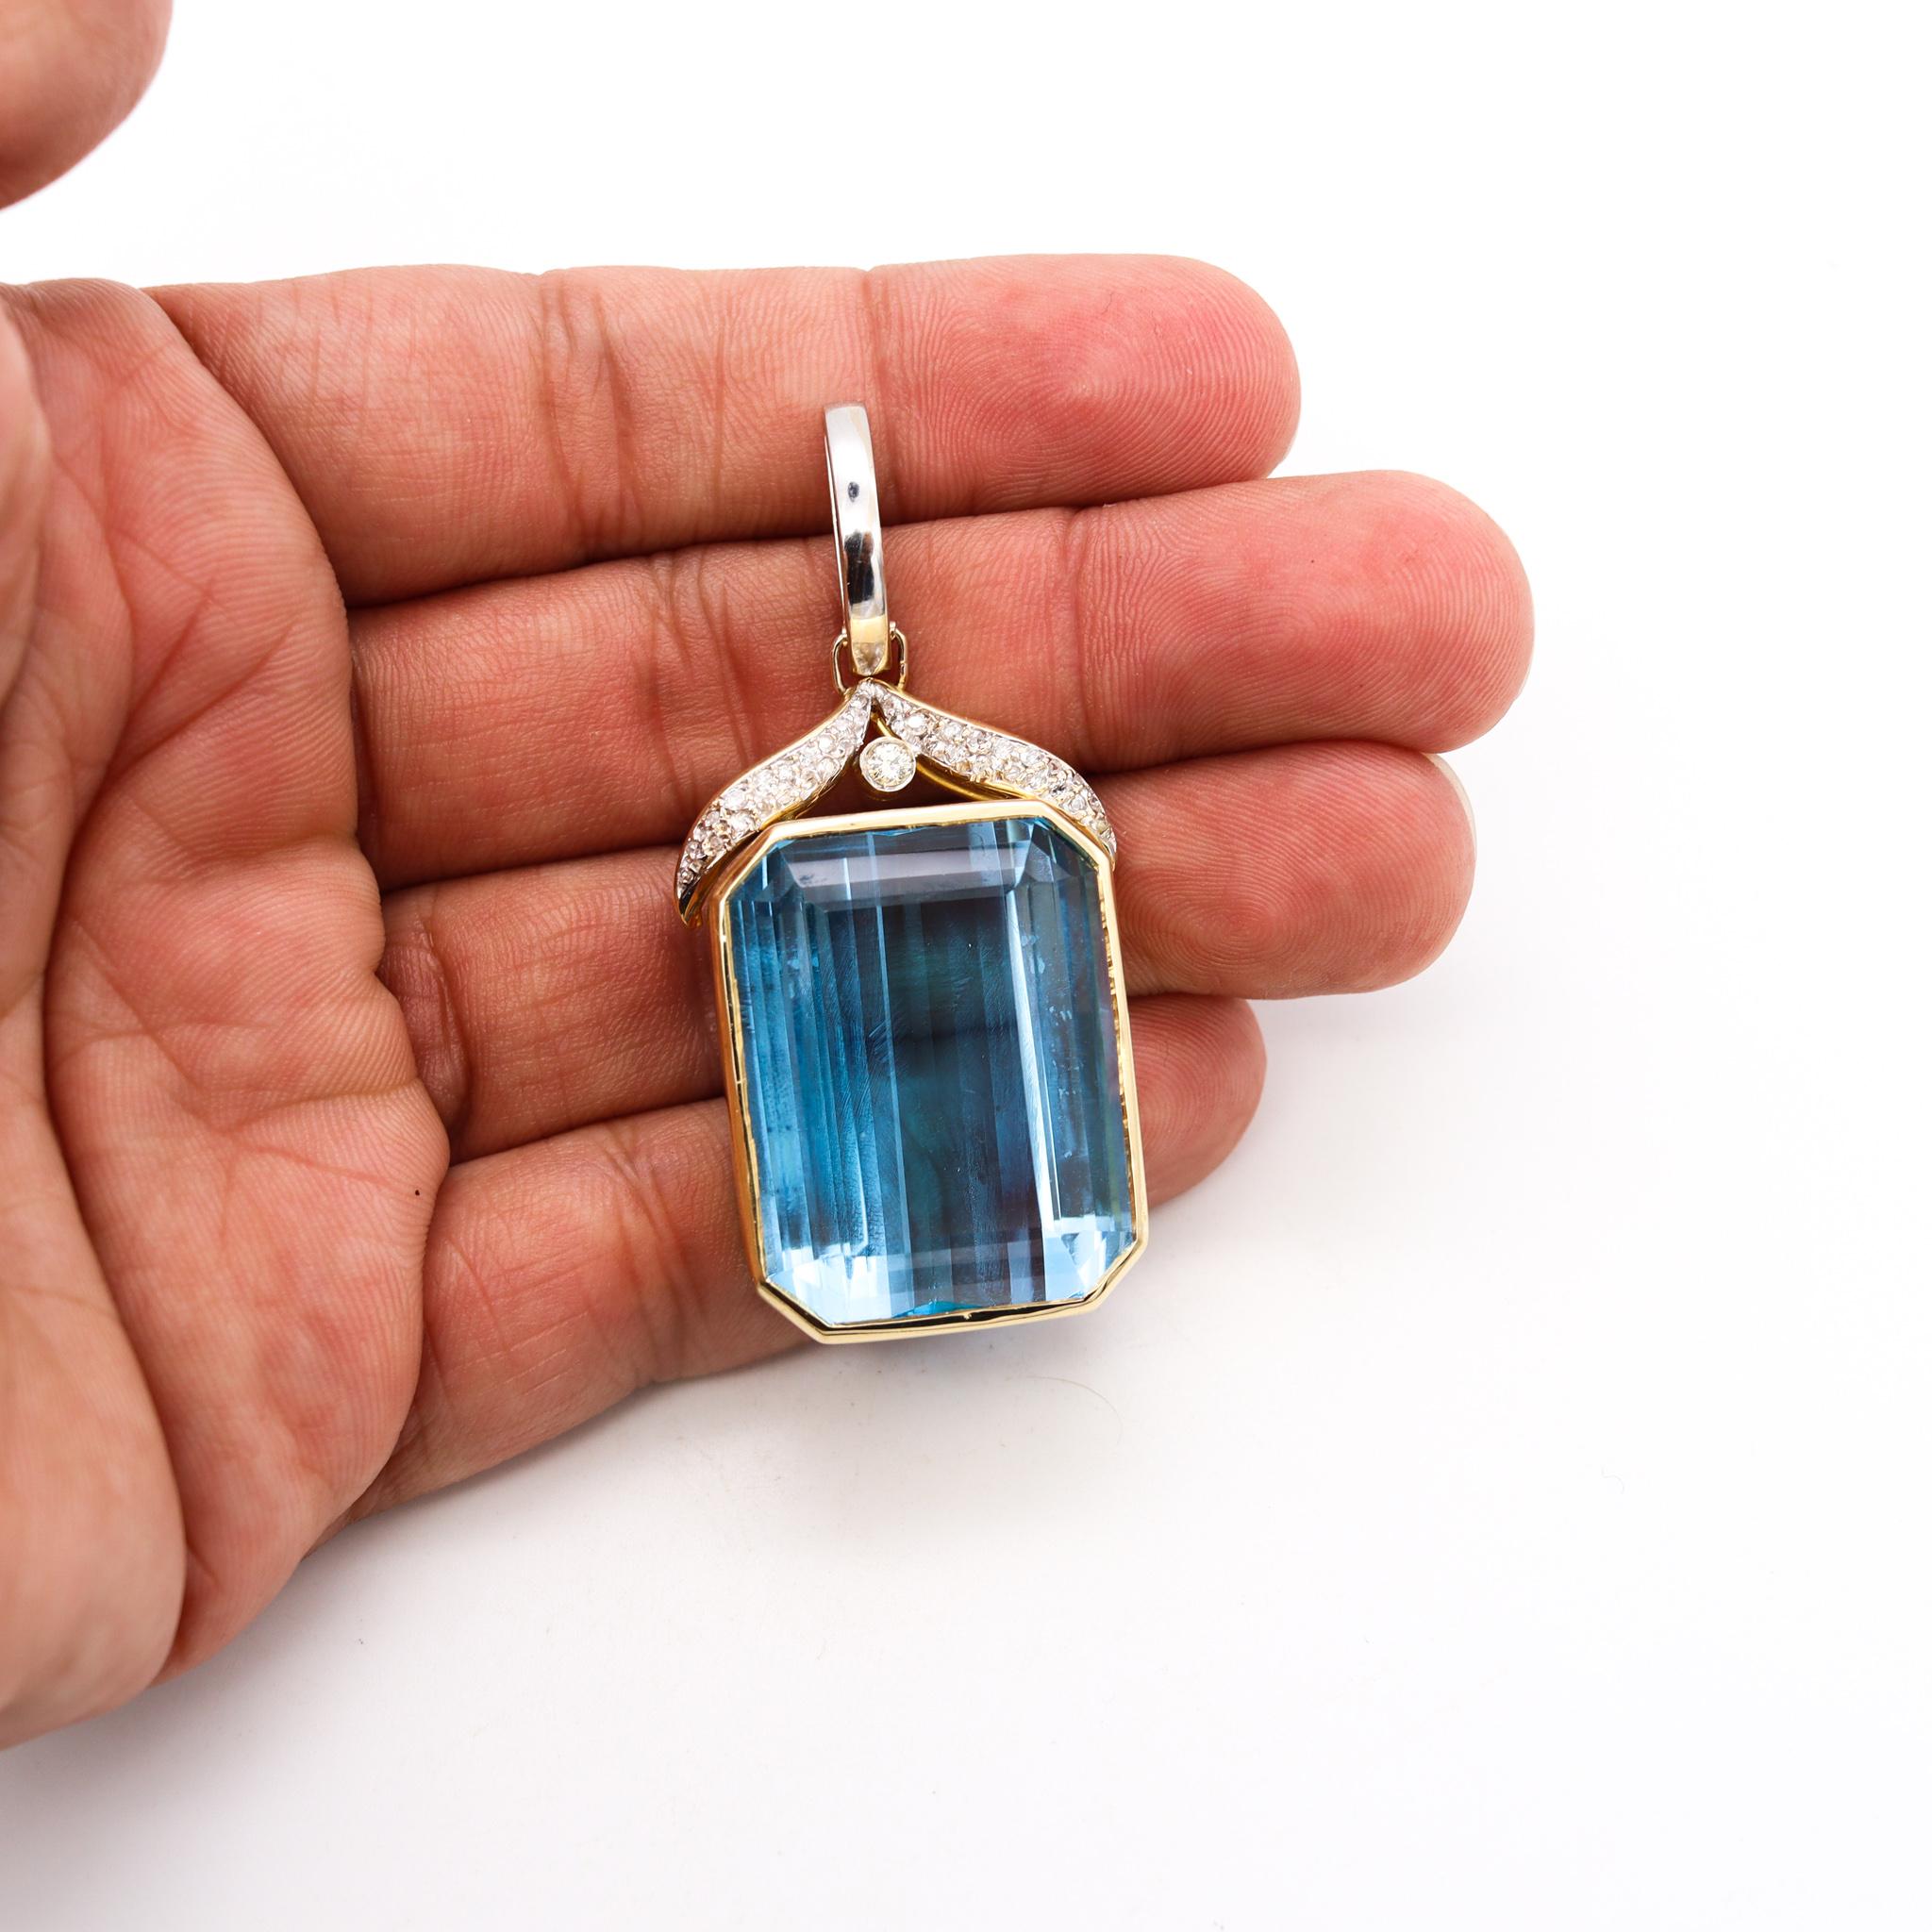 Modernist Contemporary Large Pendant In 18Kt Gold With 72.06 Ctw In Aquamarine & Diamonds For Sale